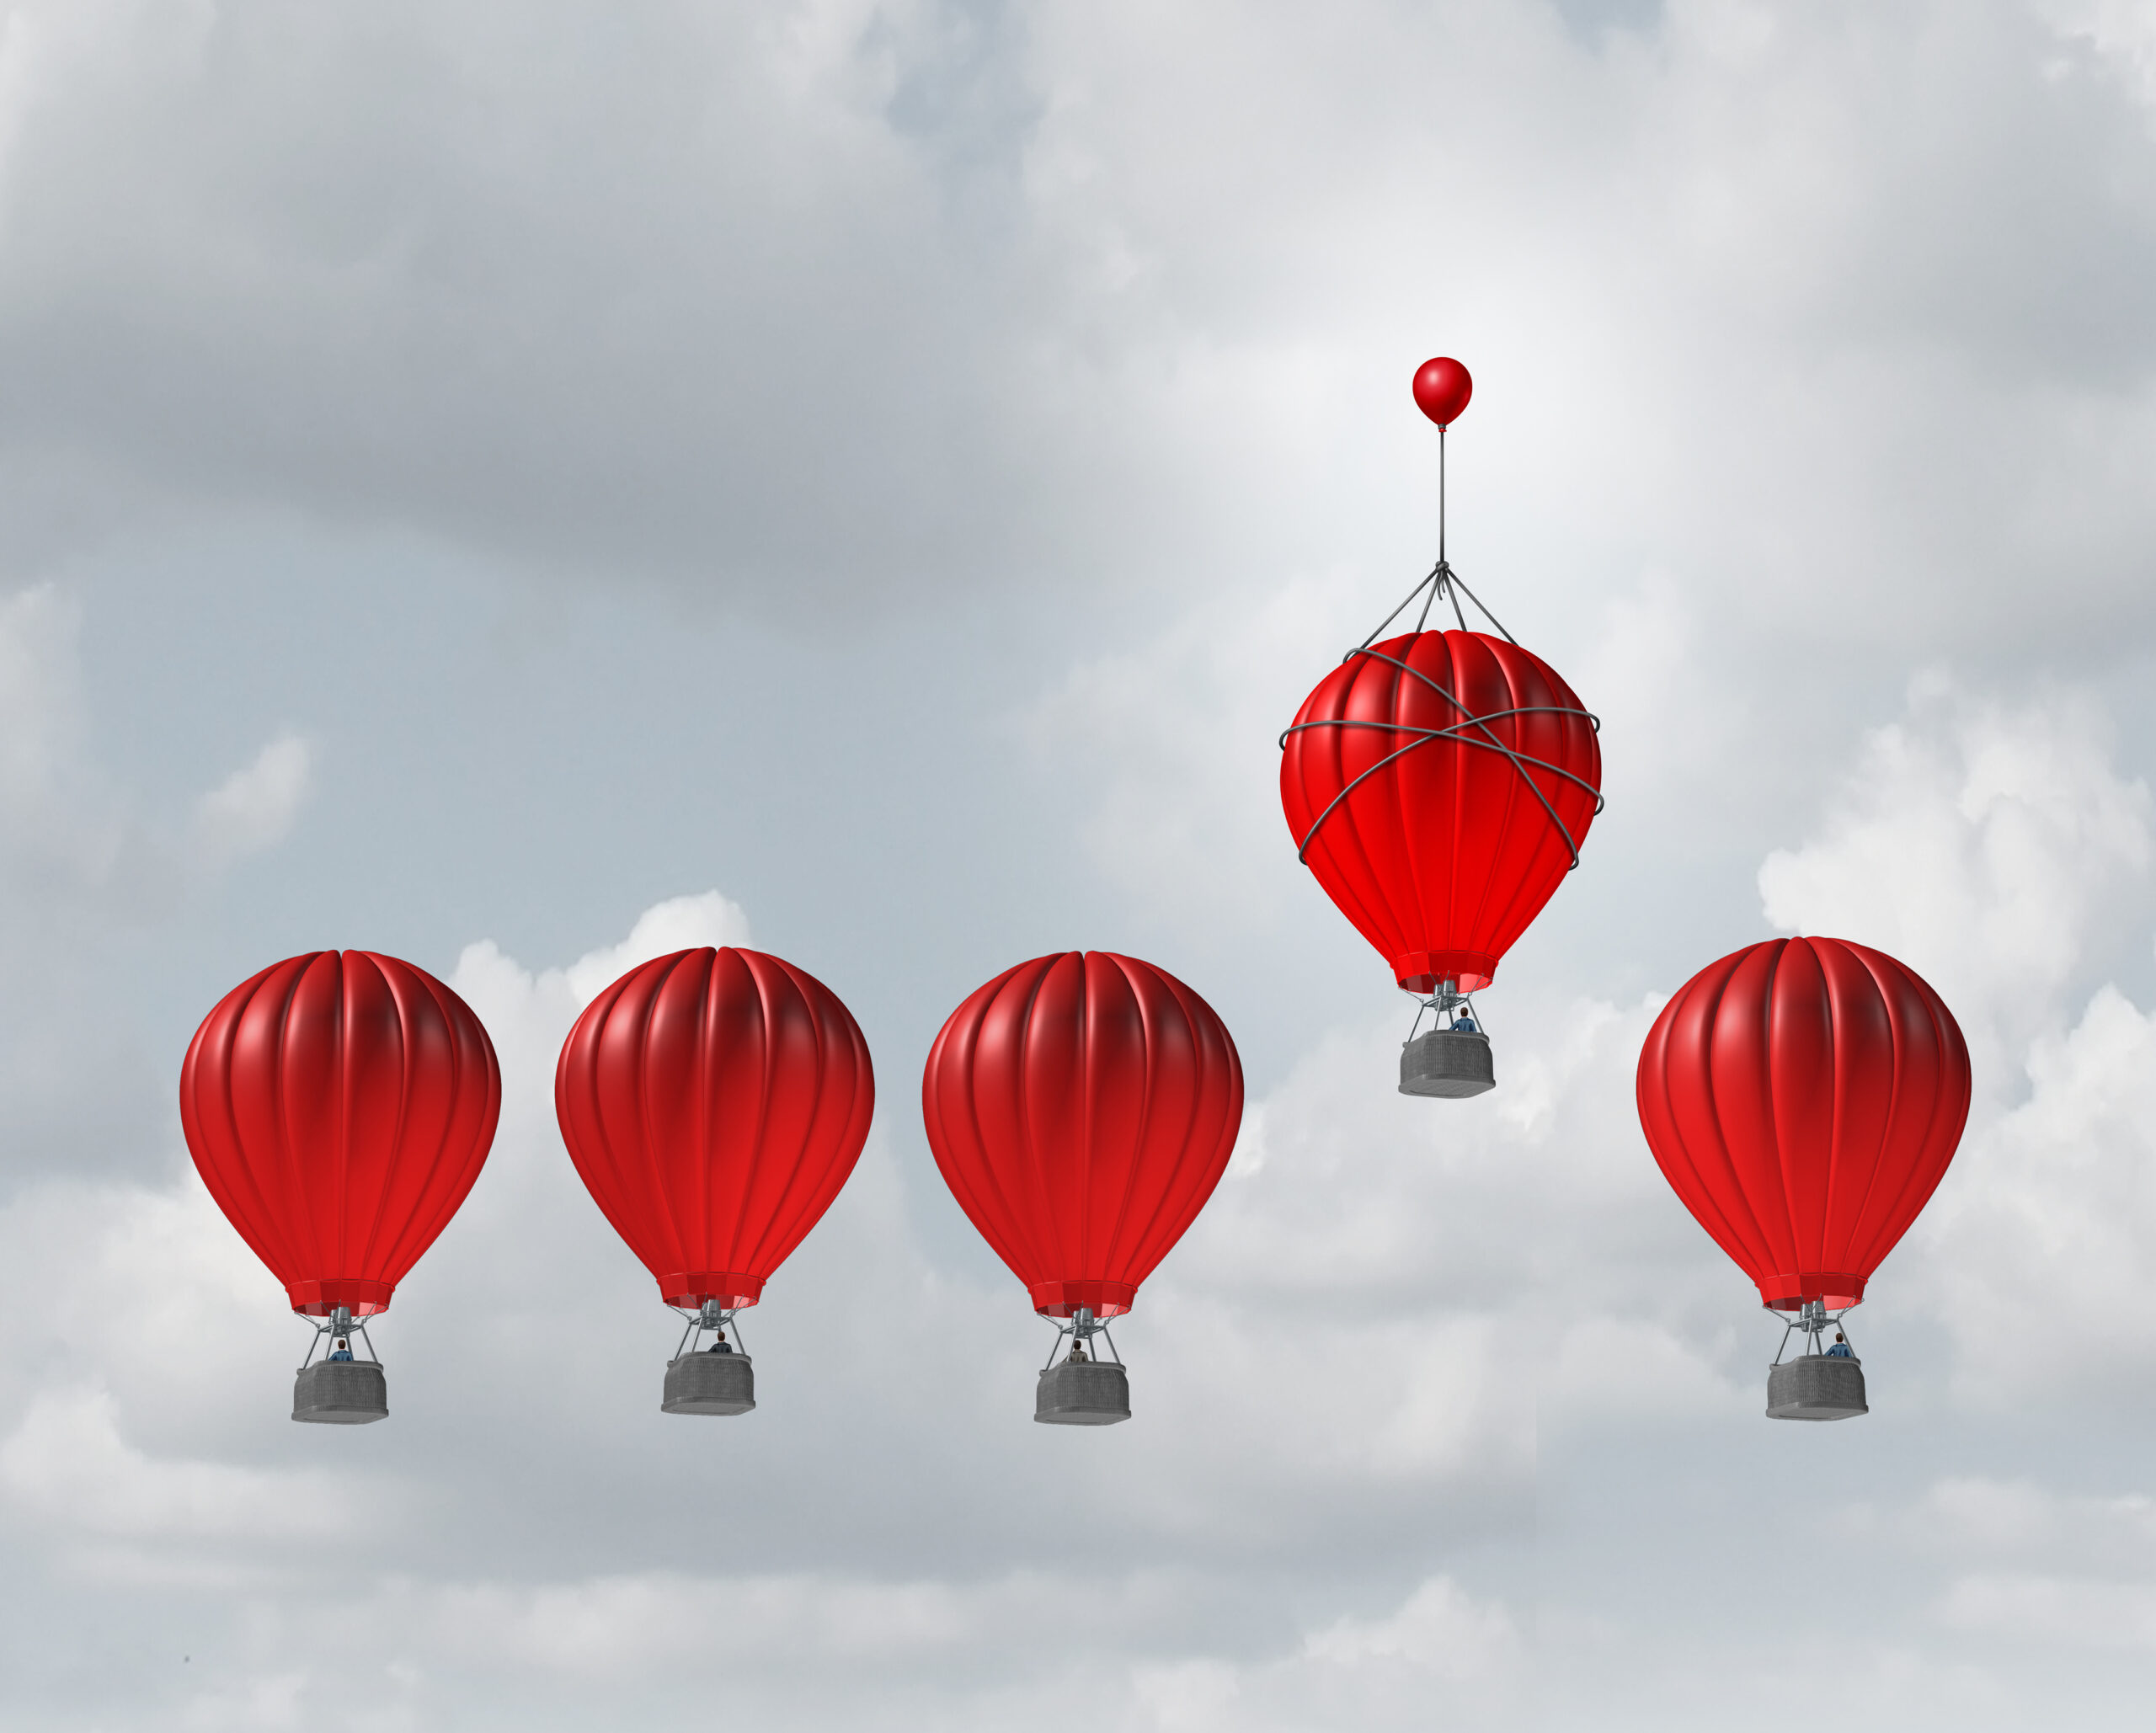 Competitive edge and business advantage concept as a group of hot air balloons racing to the top but an individual leader with a small balloon attached giving the winning competitor an extra boost to win the competition.